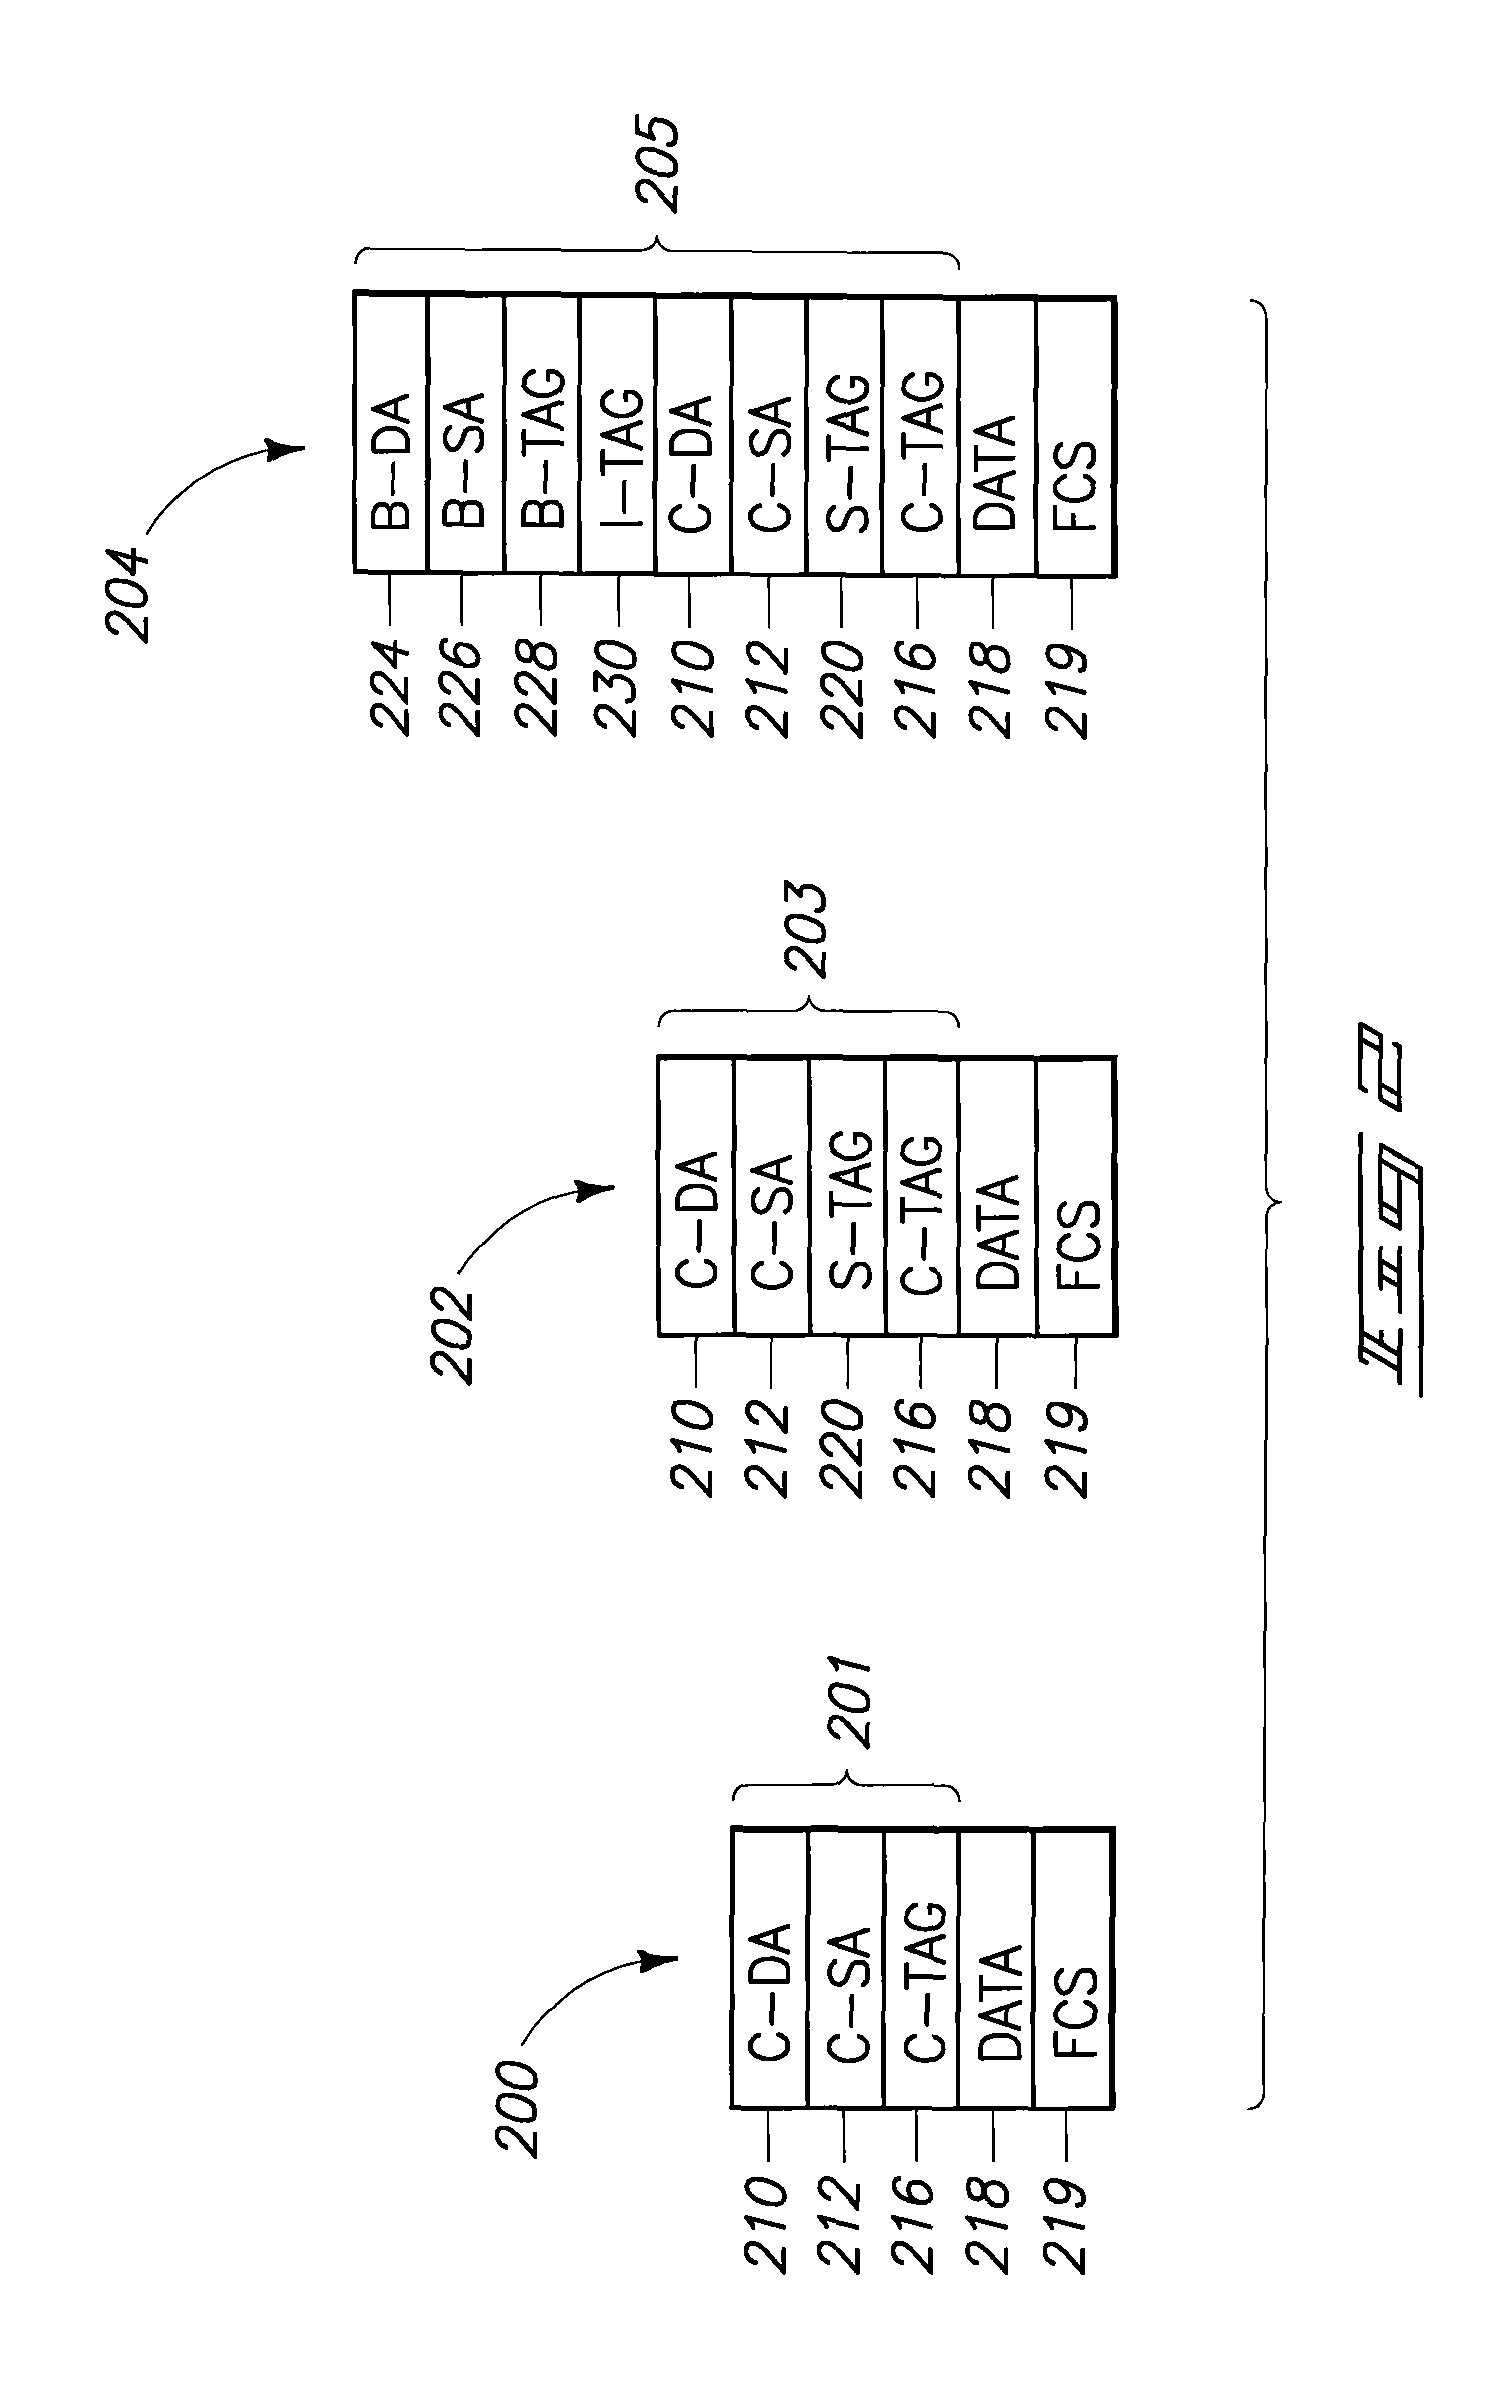 Communicating with a control plane using a forwarding information format and control plane processing of packets devoid of a virtual switch identifier